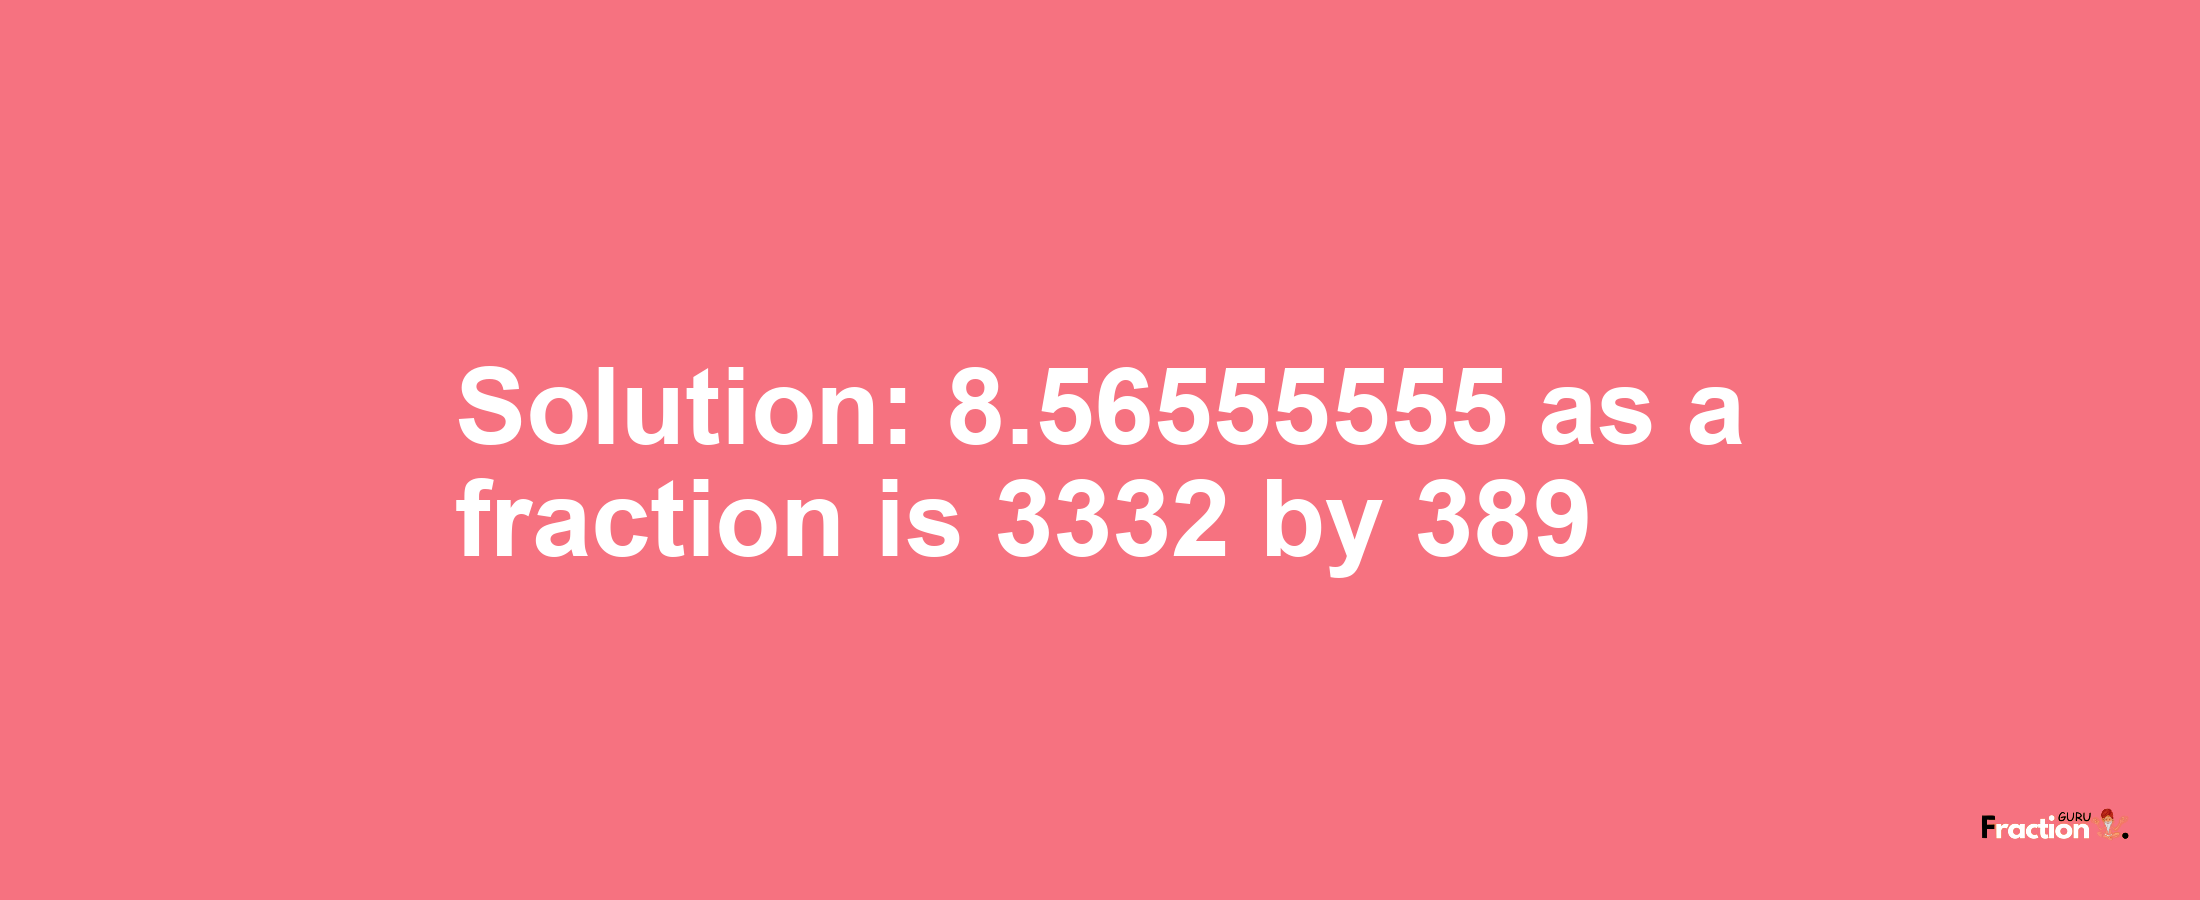 Solution:8.56555555 as a fraction is 3332/389